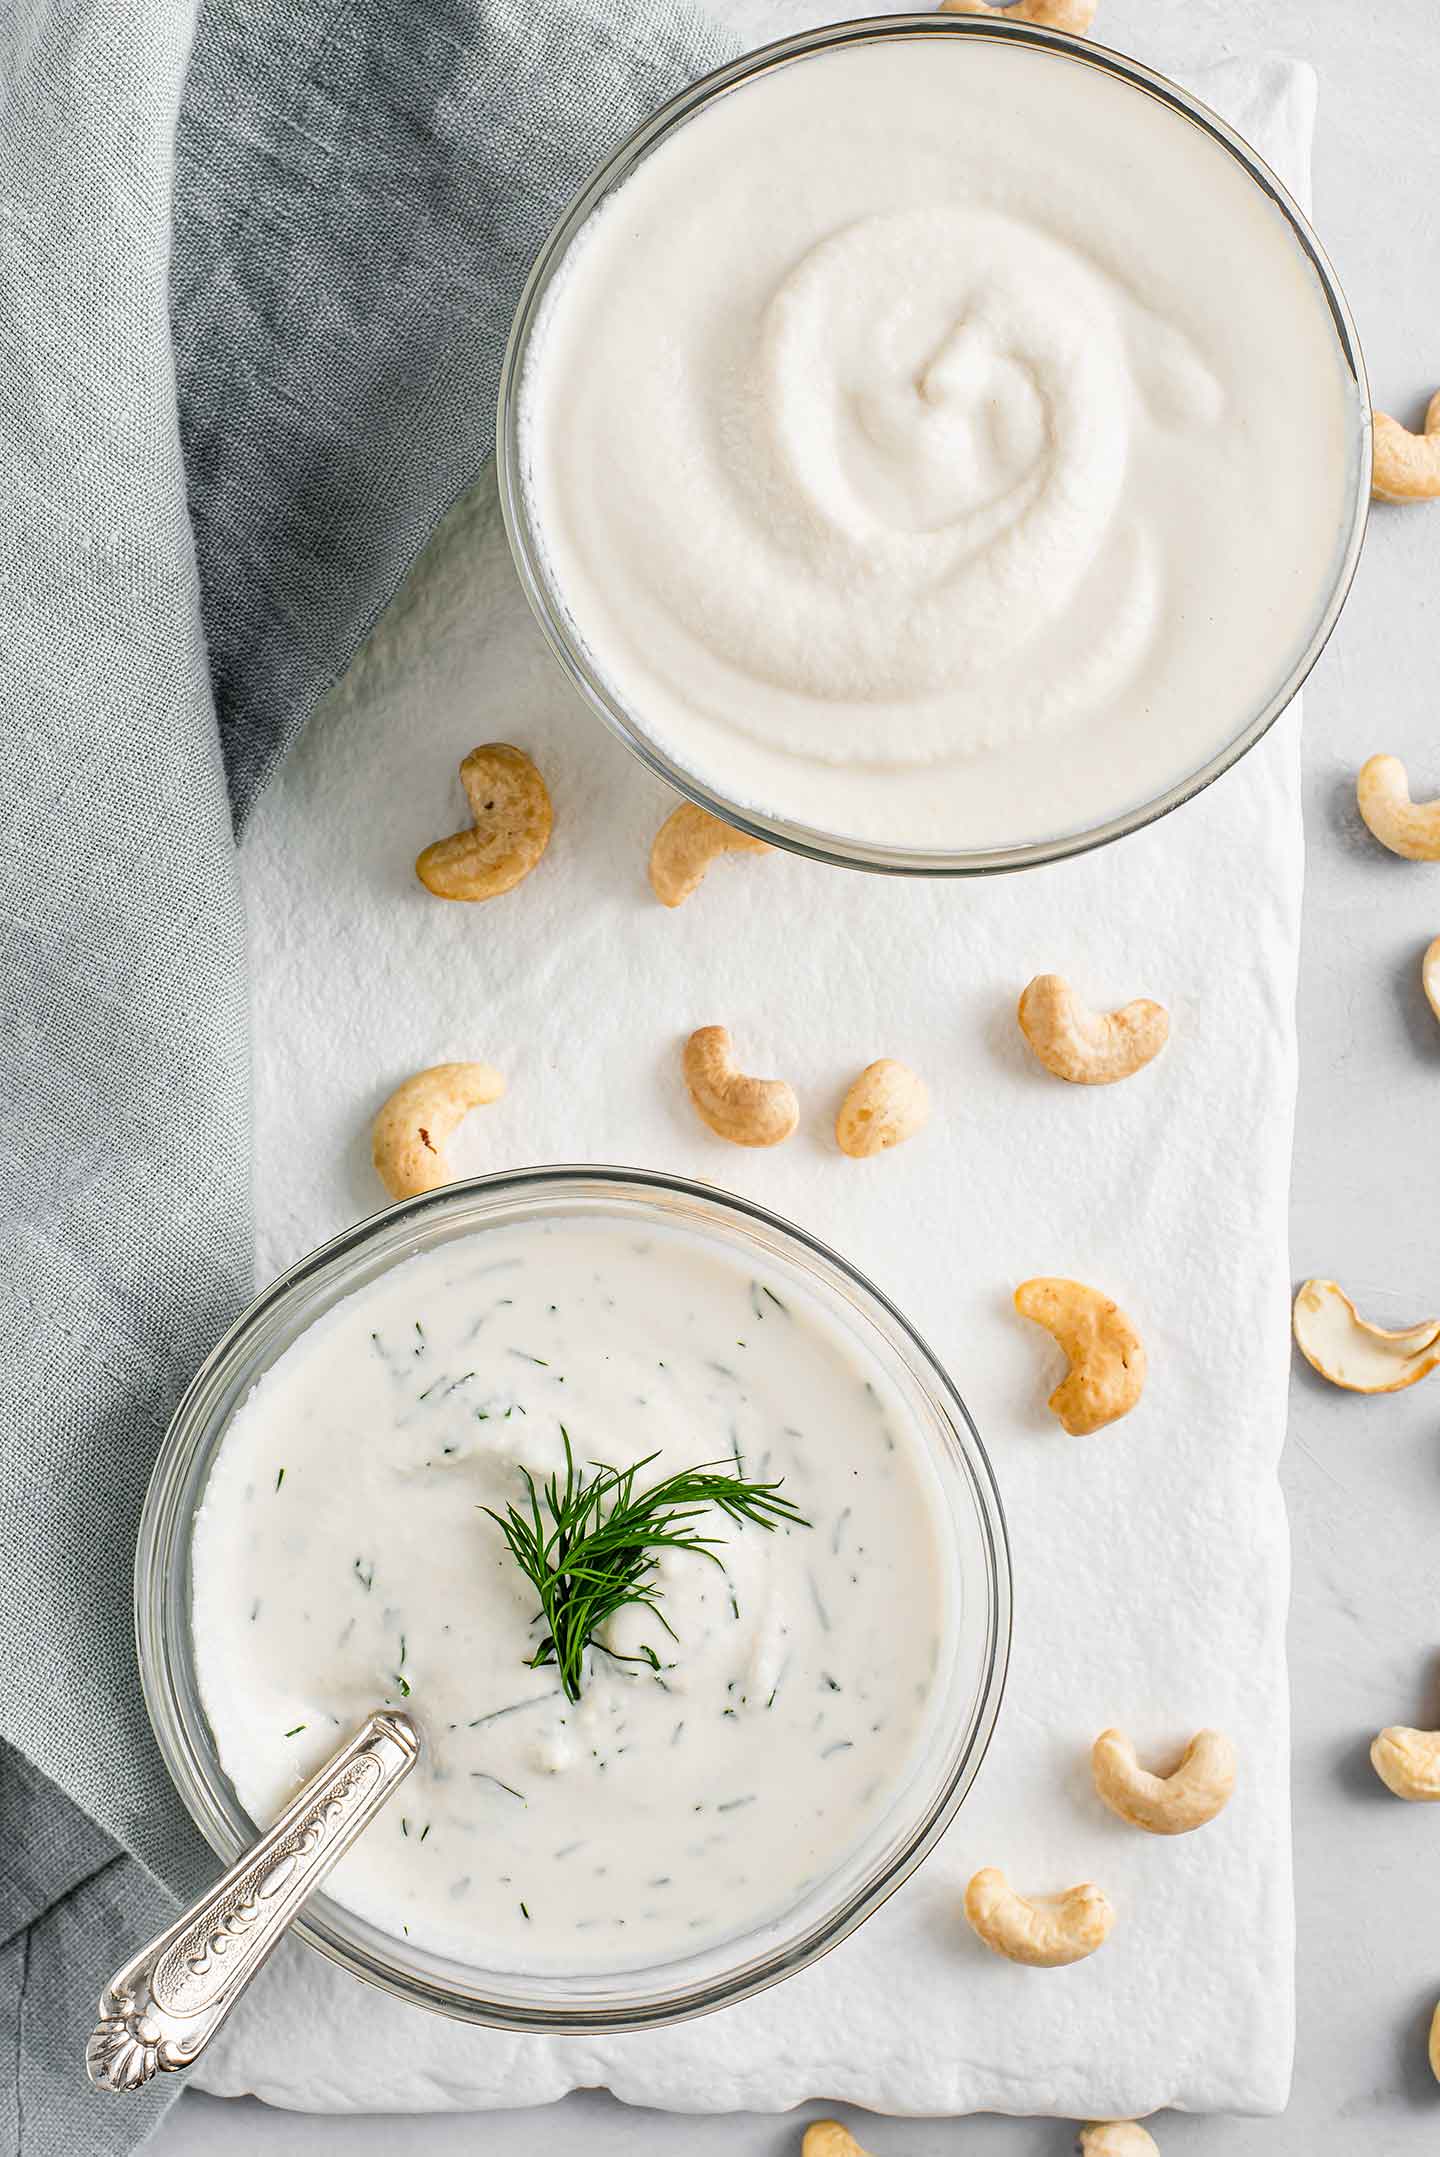 Top down view of plain sour cream and dill infused sour cream. The dill sour cream has a fresh sprig of dill on top and cashews are scattered between the two bowls.